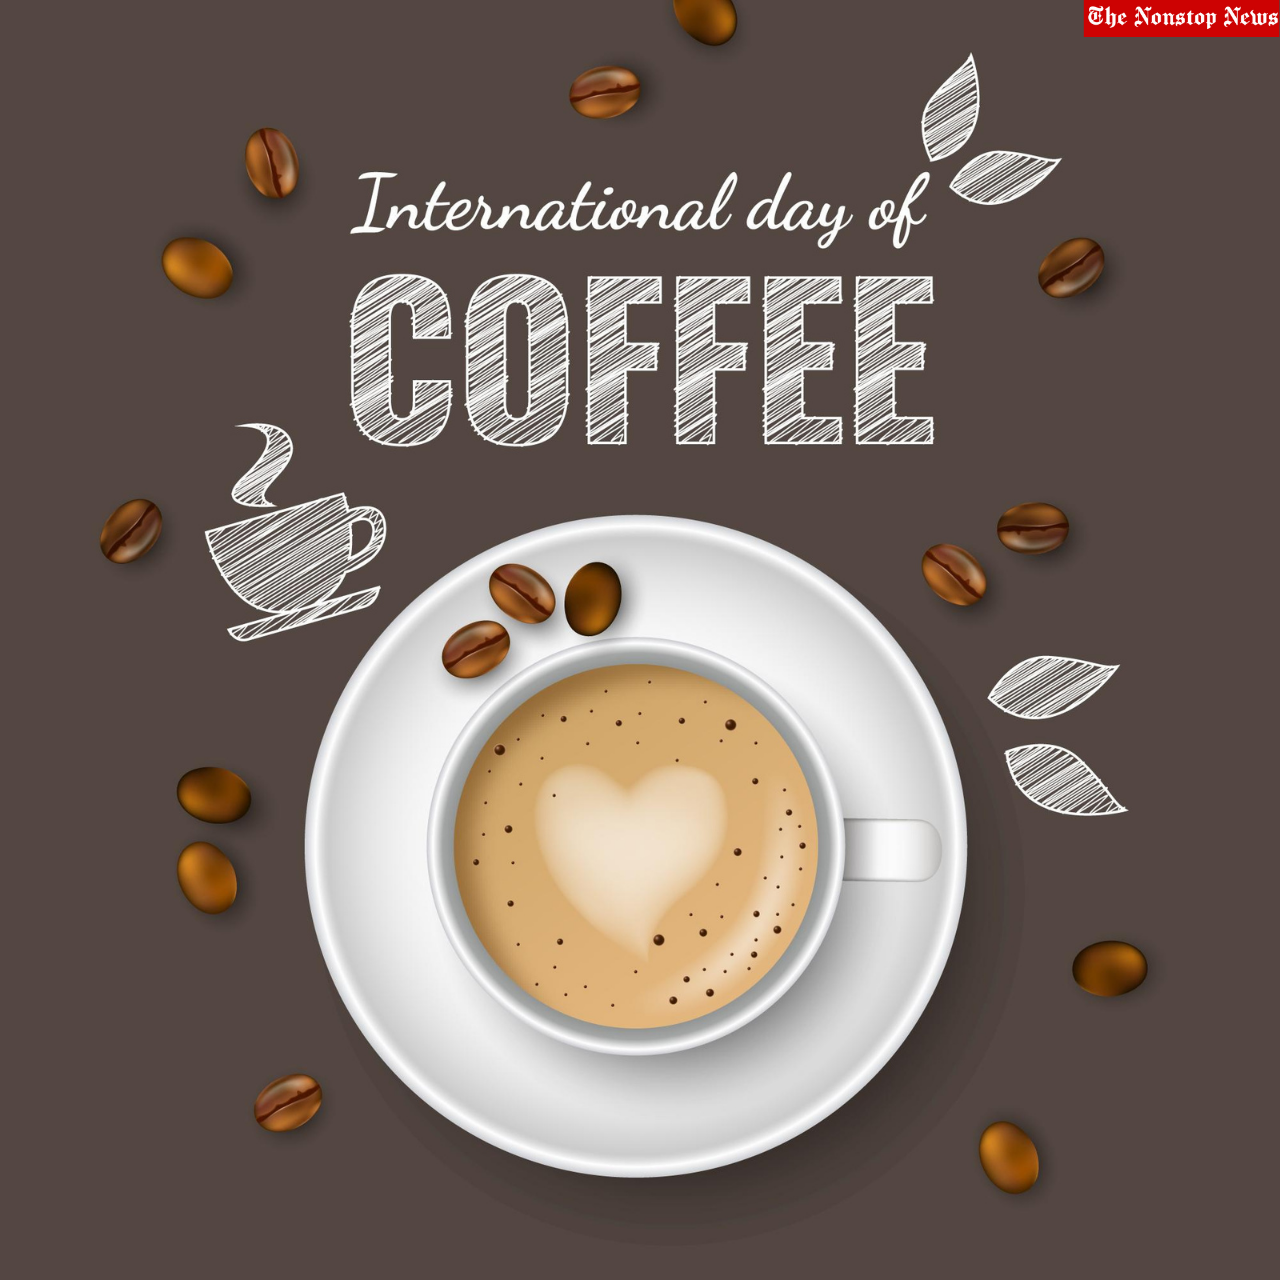 International Coffee Day 2021 Quotes, Captions, Wishes, Poster, HD Images, Messages, Meme and Gif to Share